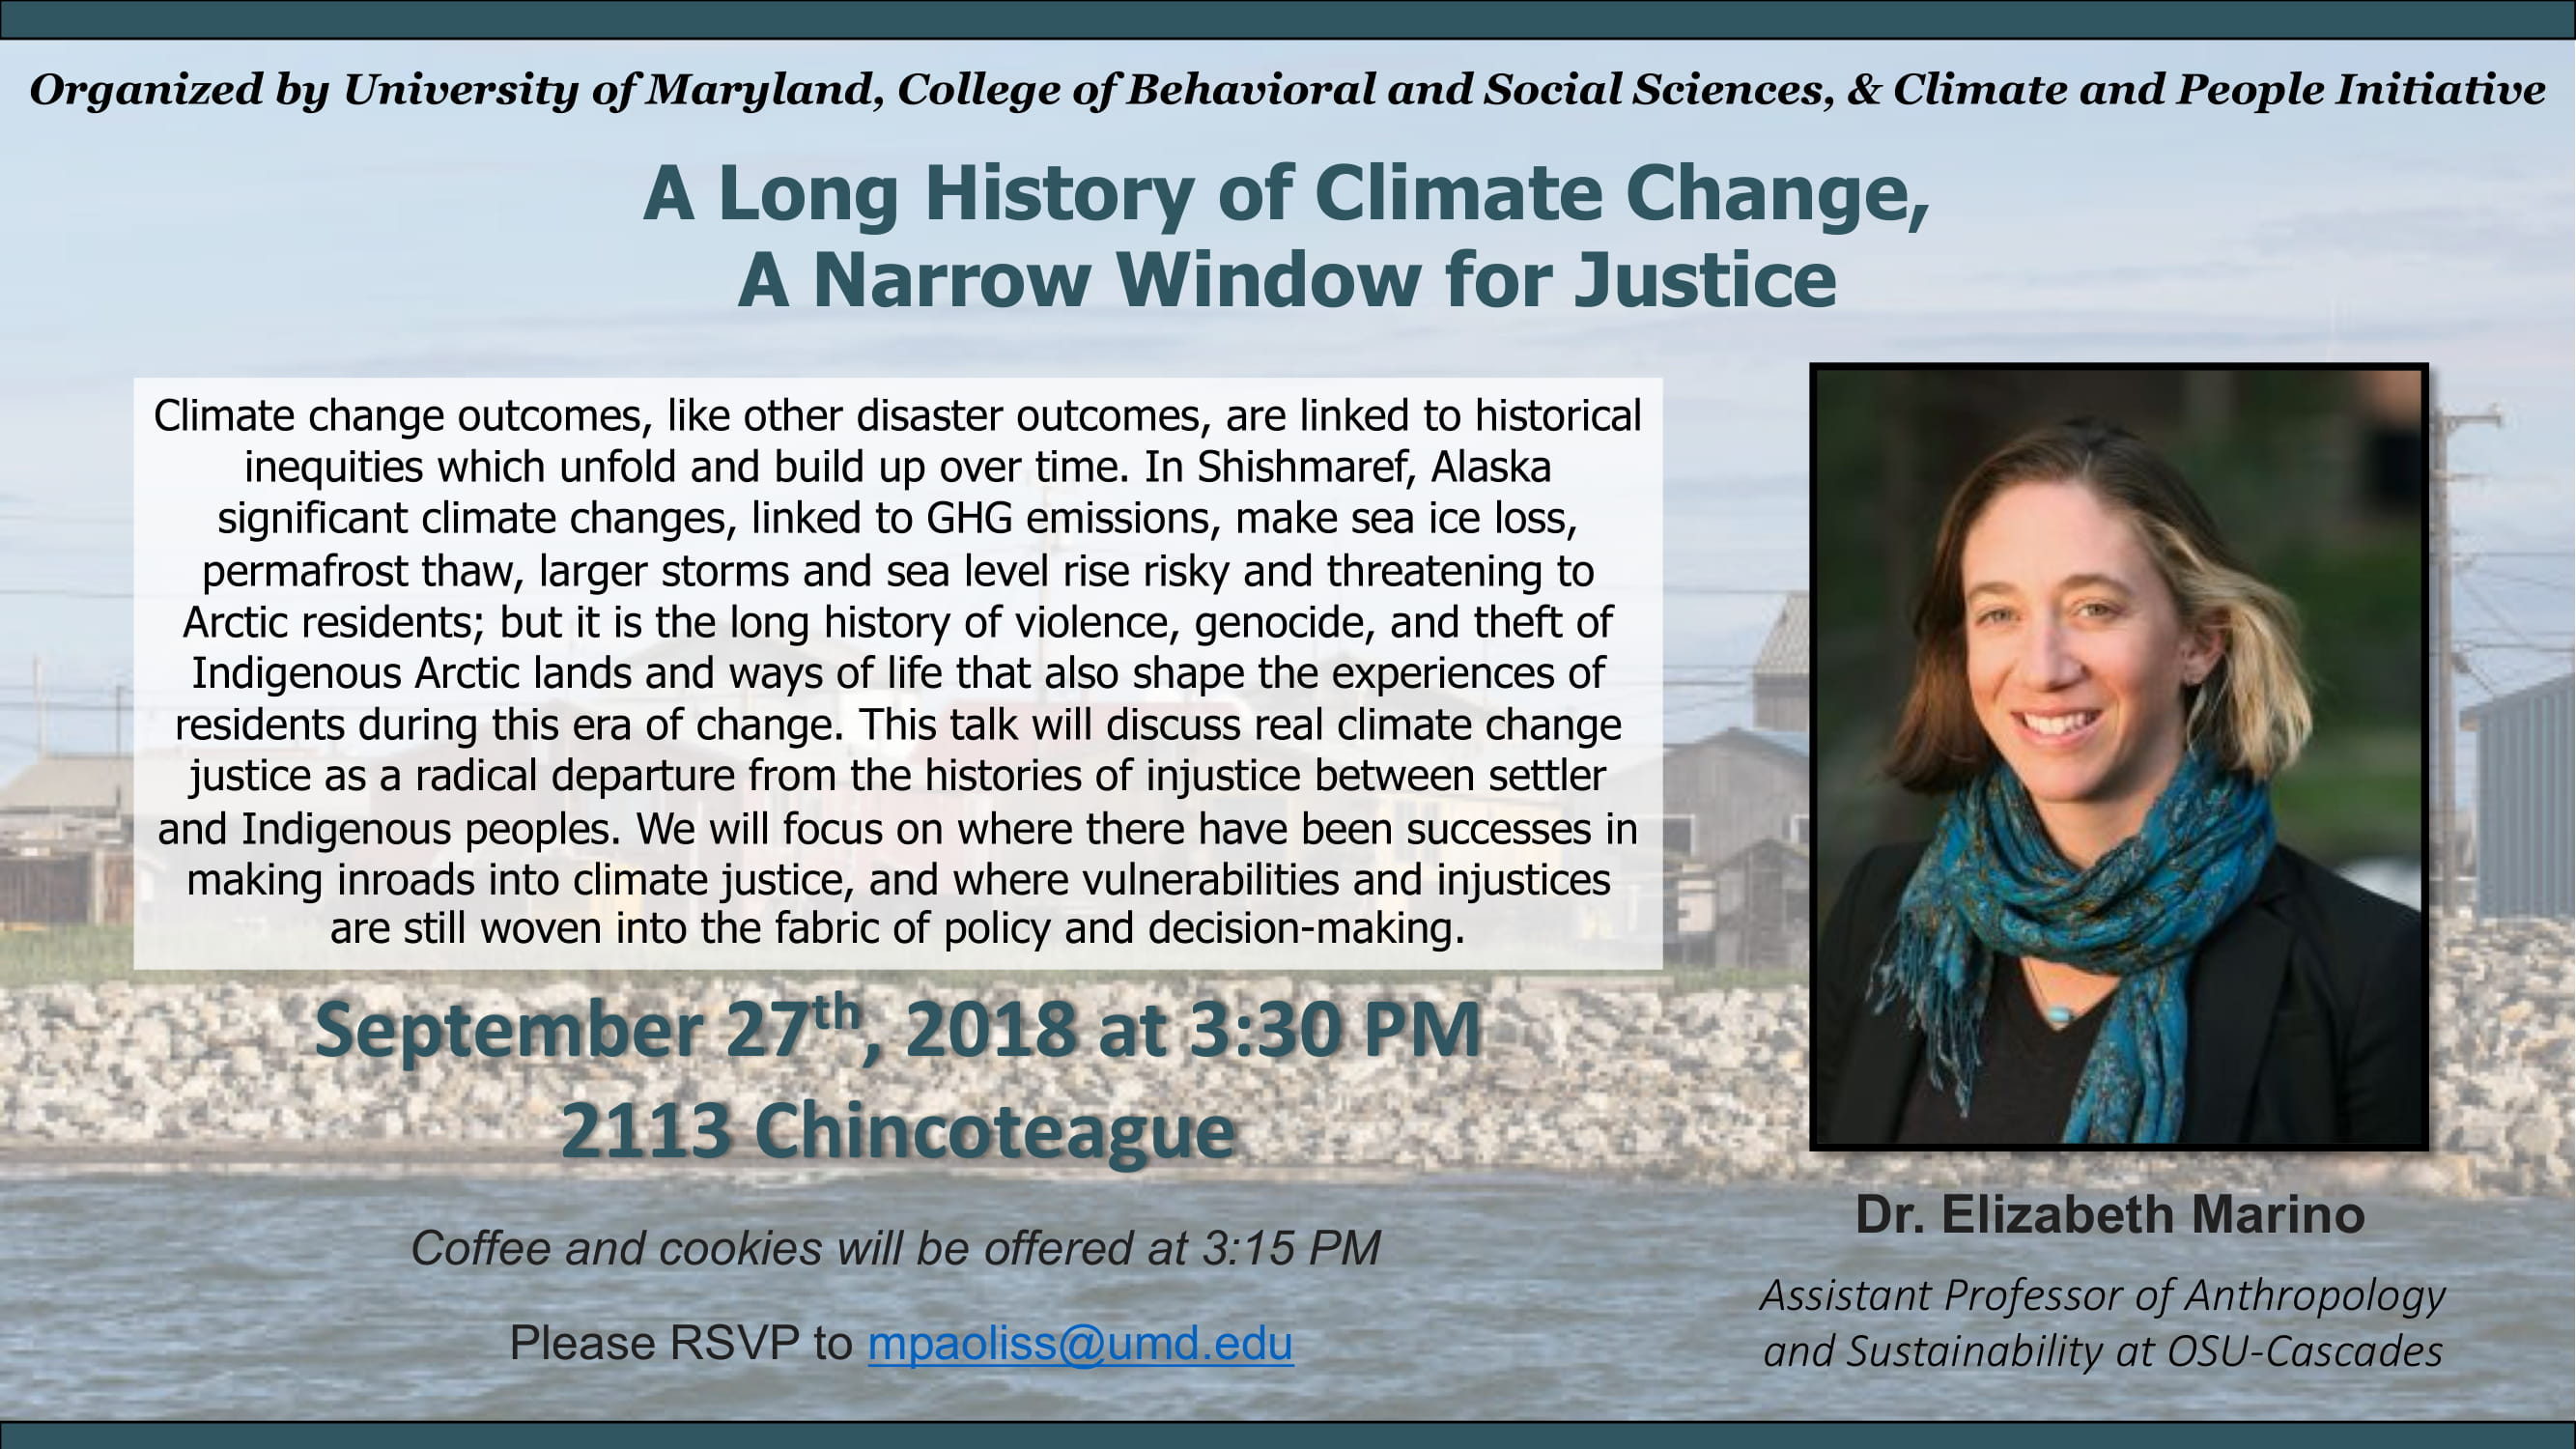 Elizabeth Marino's Seminar: A Long History of Climate Change, a Narrow Window for Justice